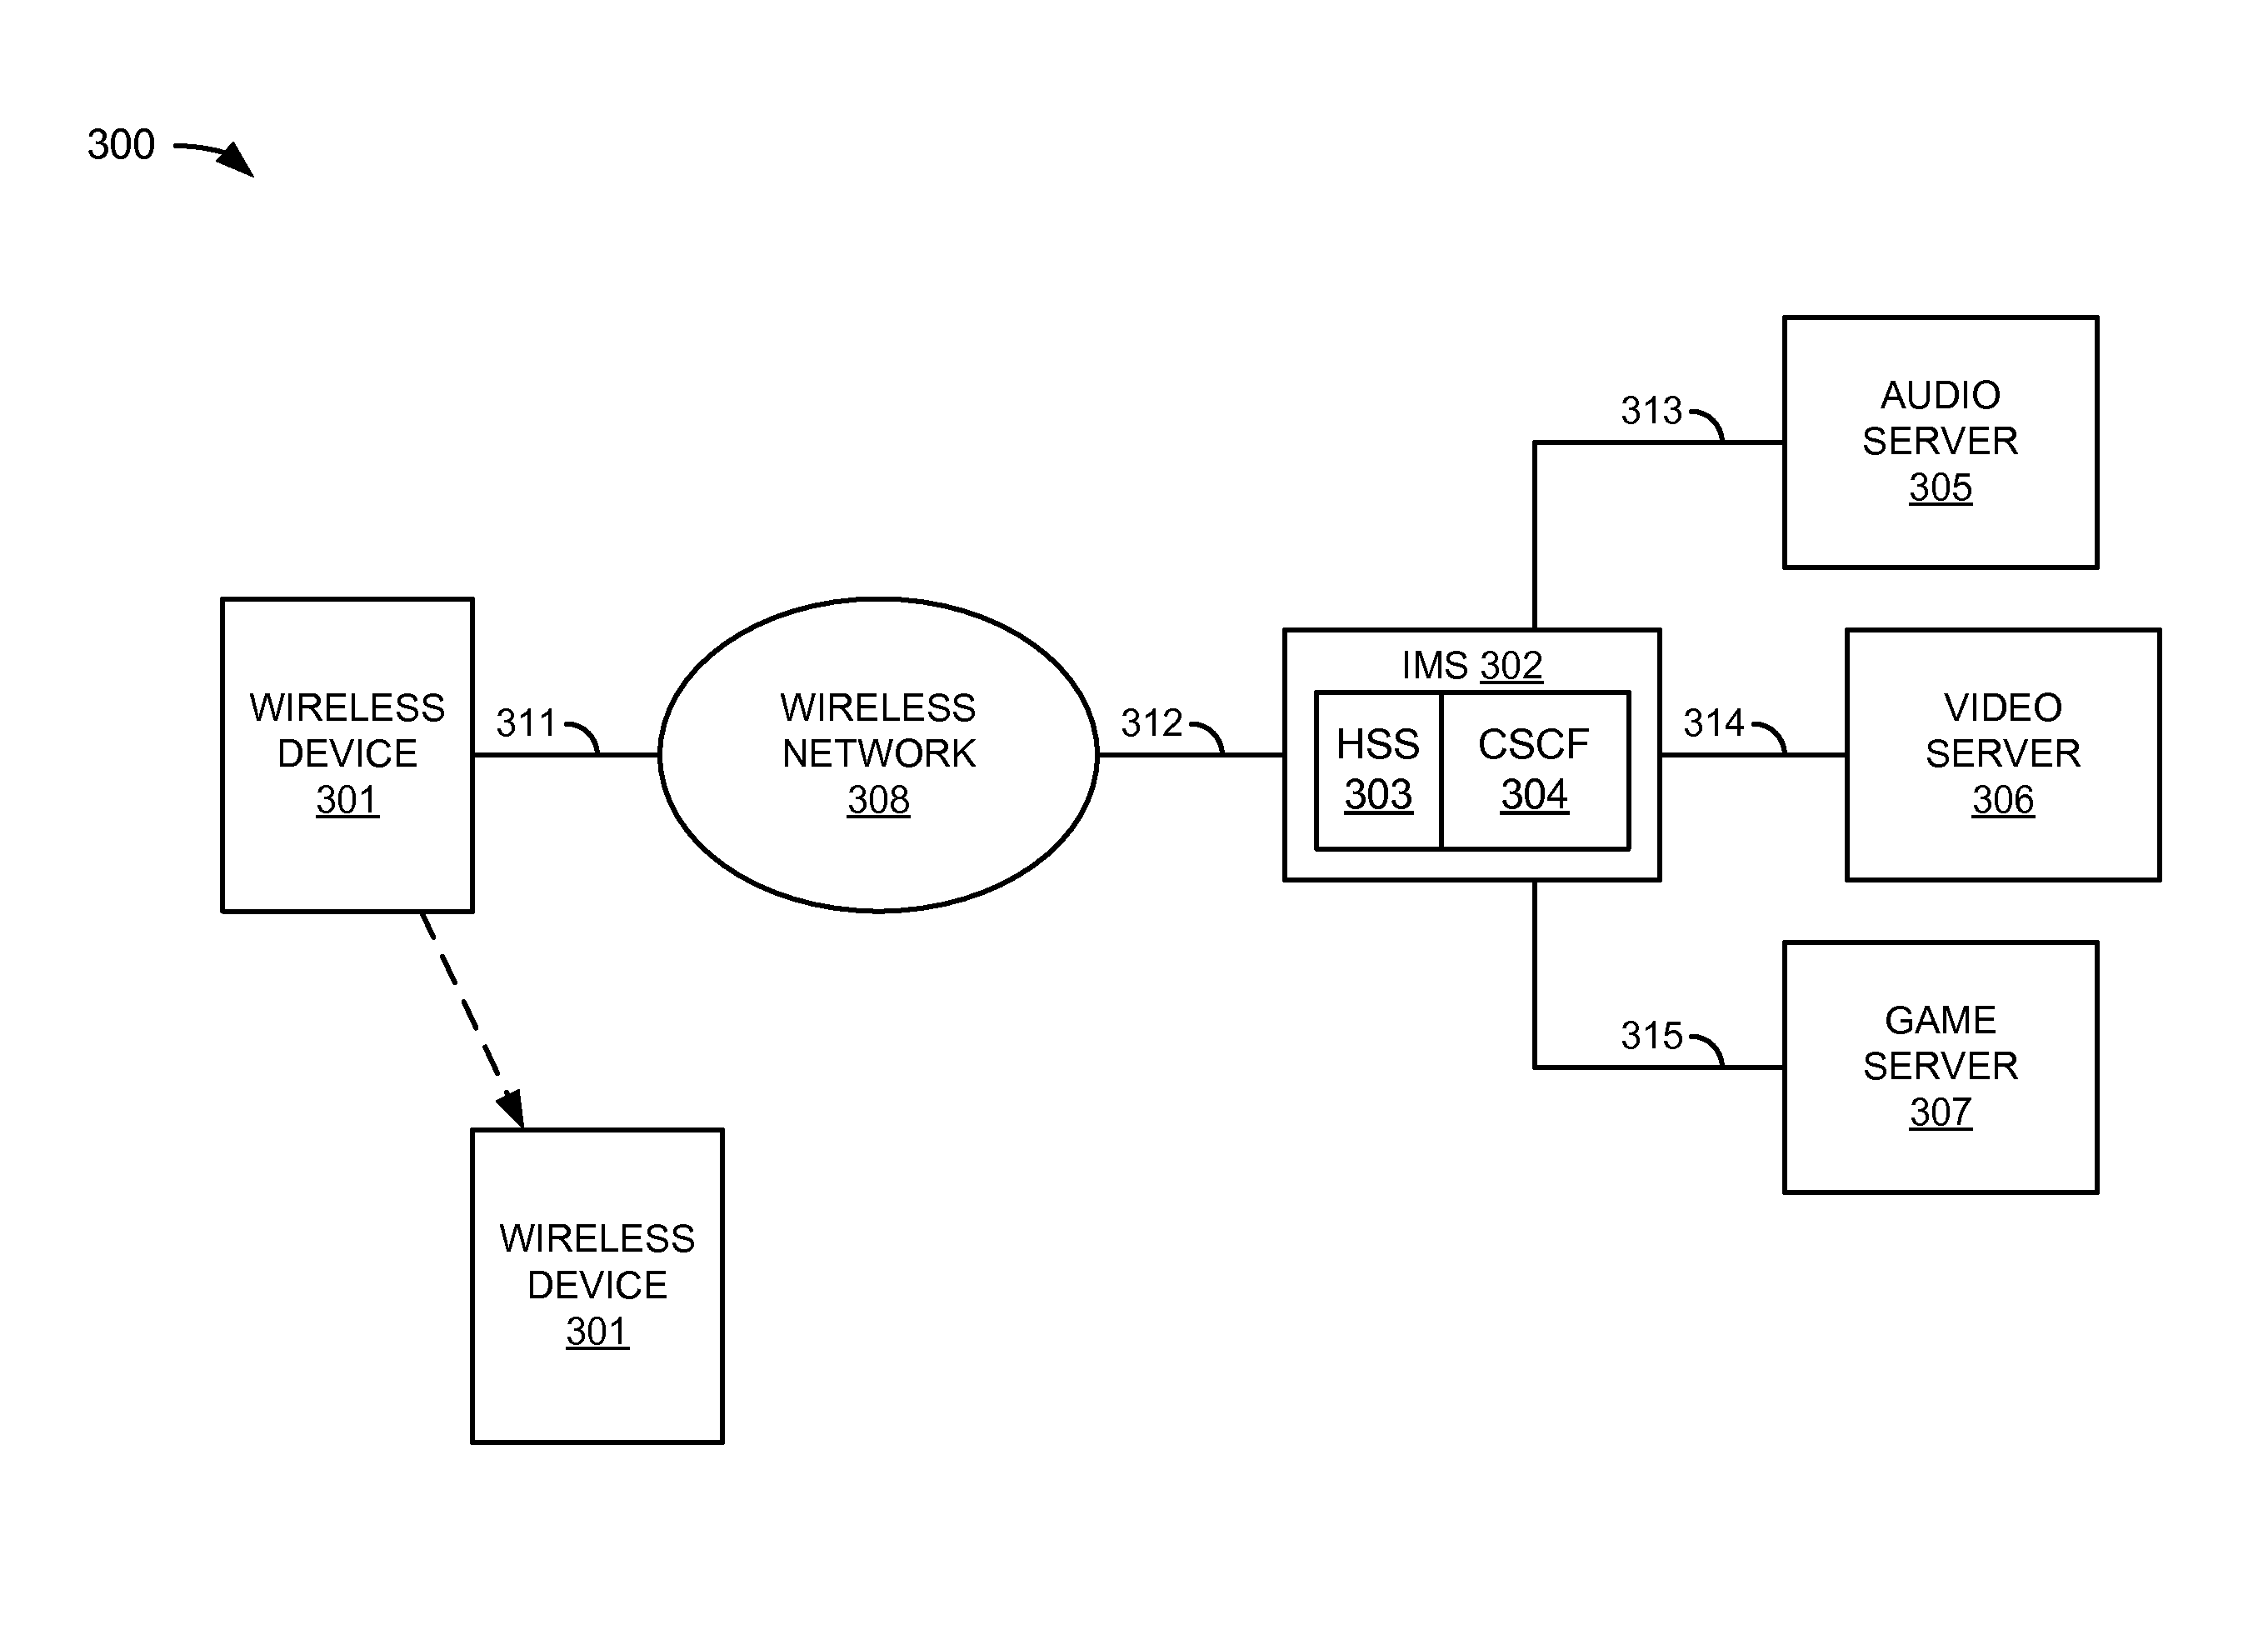 Timer based logic component for initial filter criteria in a wireless communication system